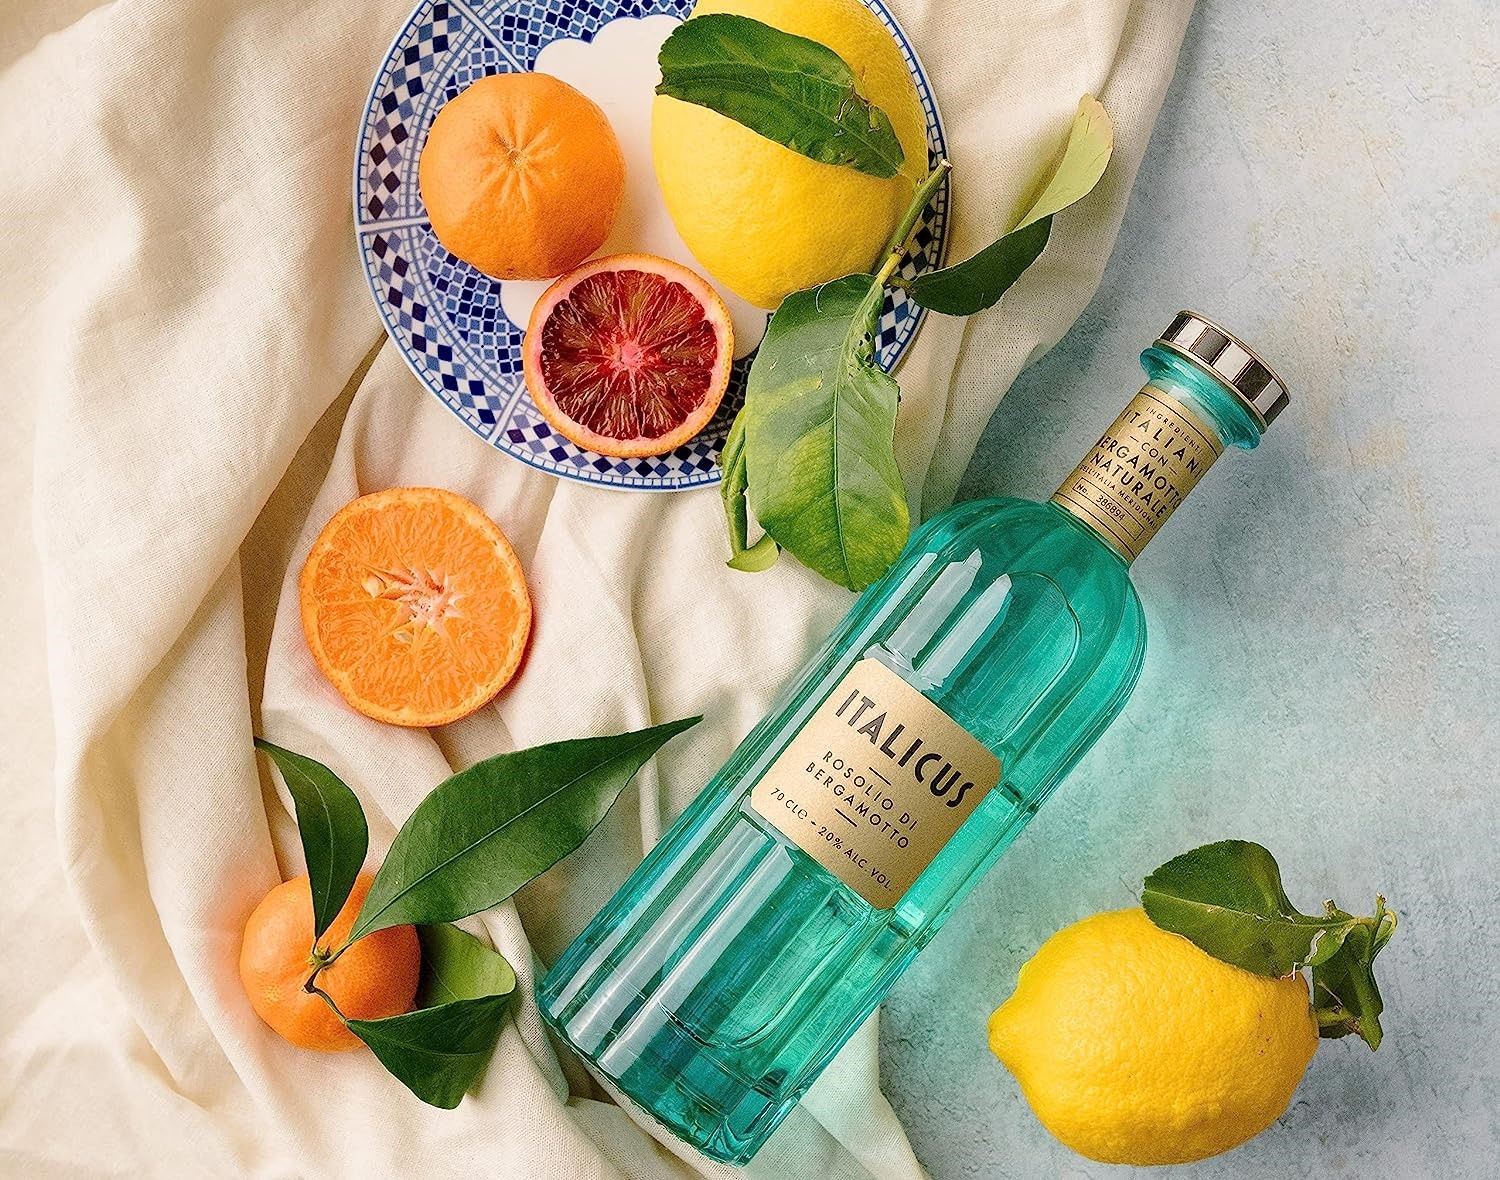 Our food writer's favourite aperitif of the summer is currently on sale!